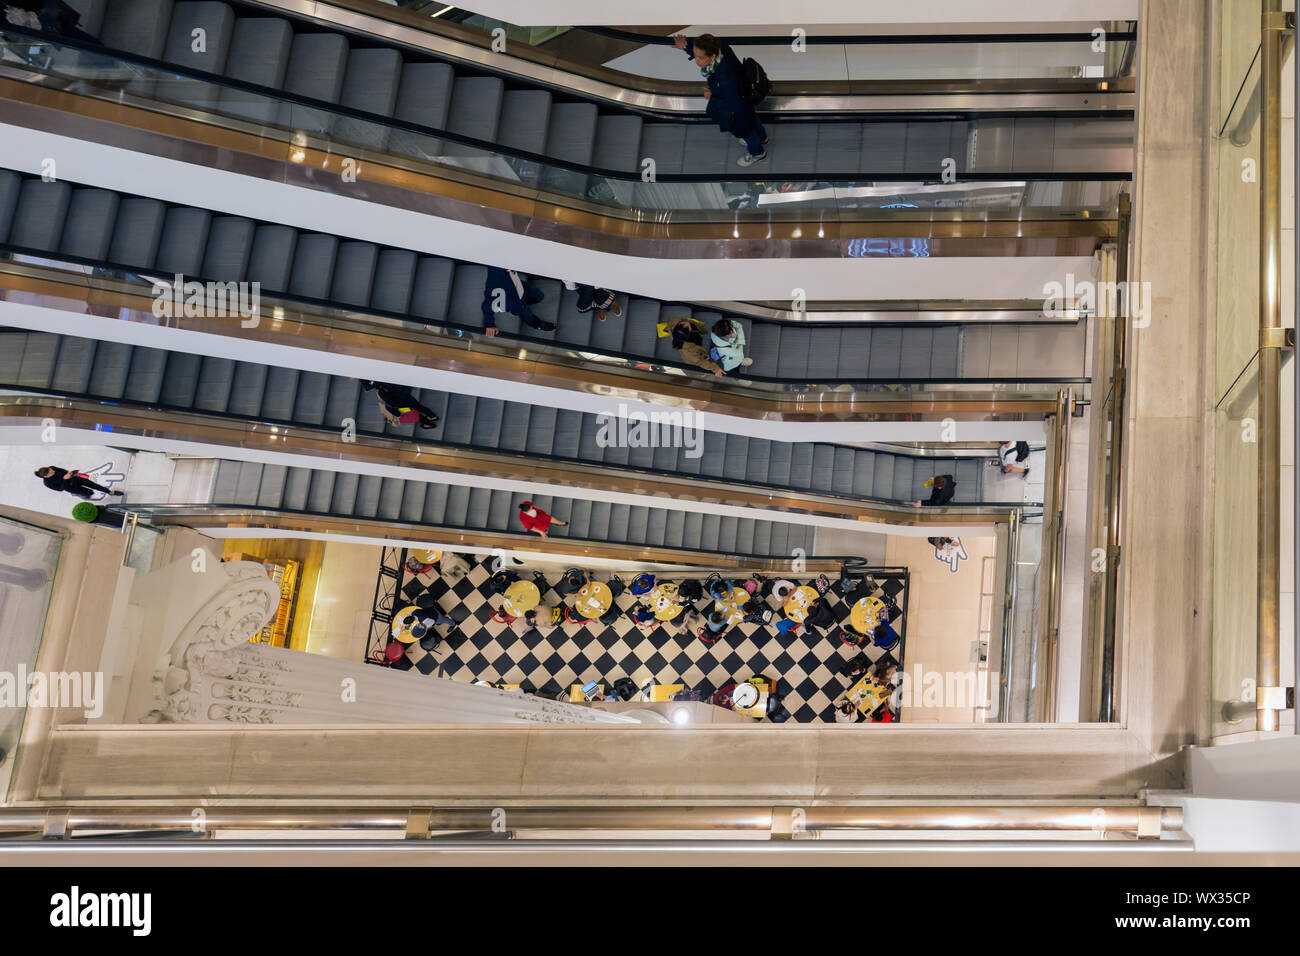 Stairwell with shopping people in Selfridges department store London Stock Photo